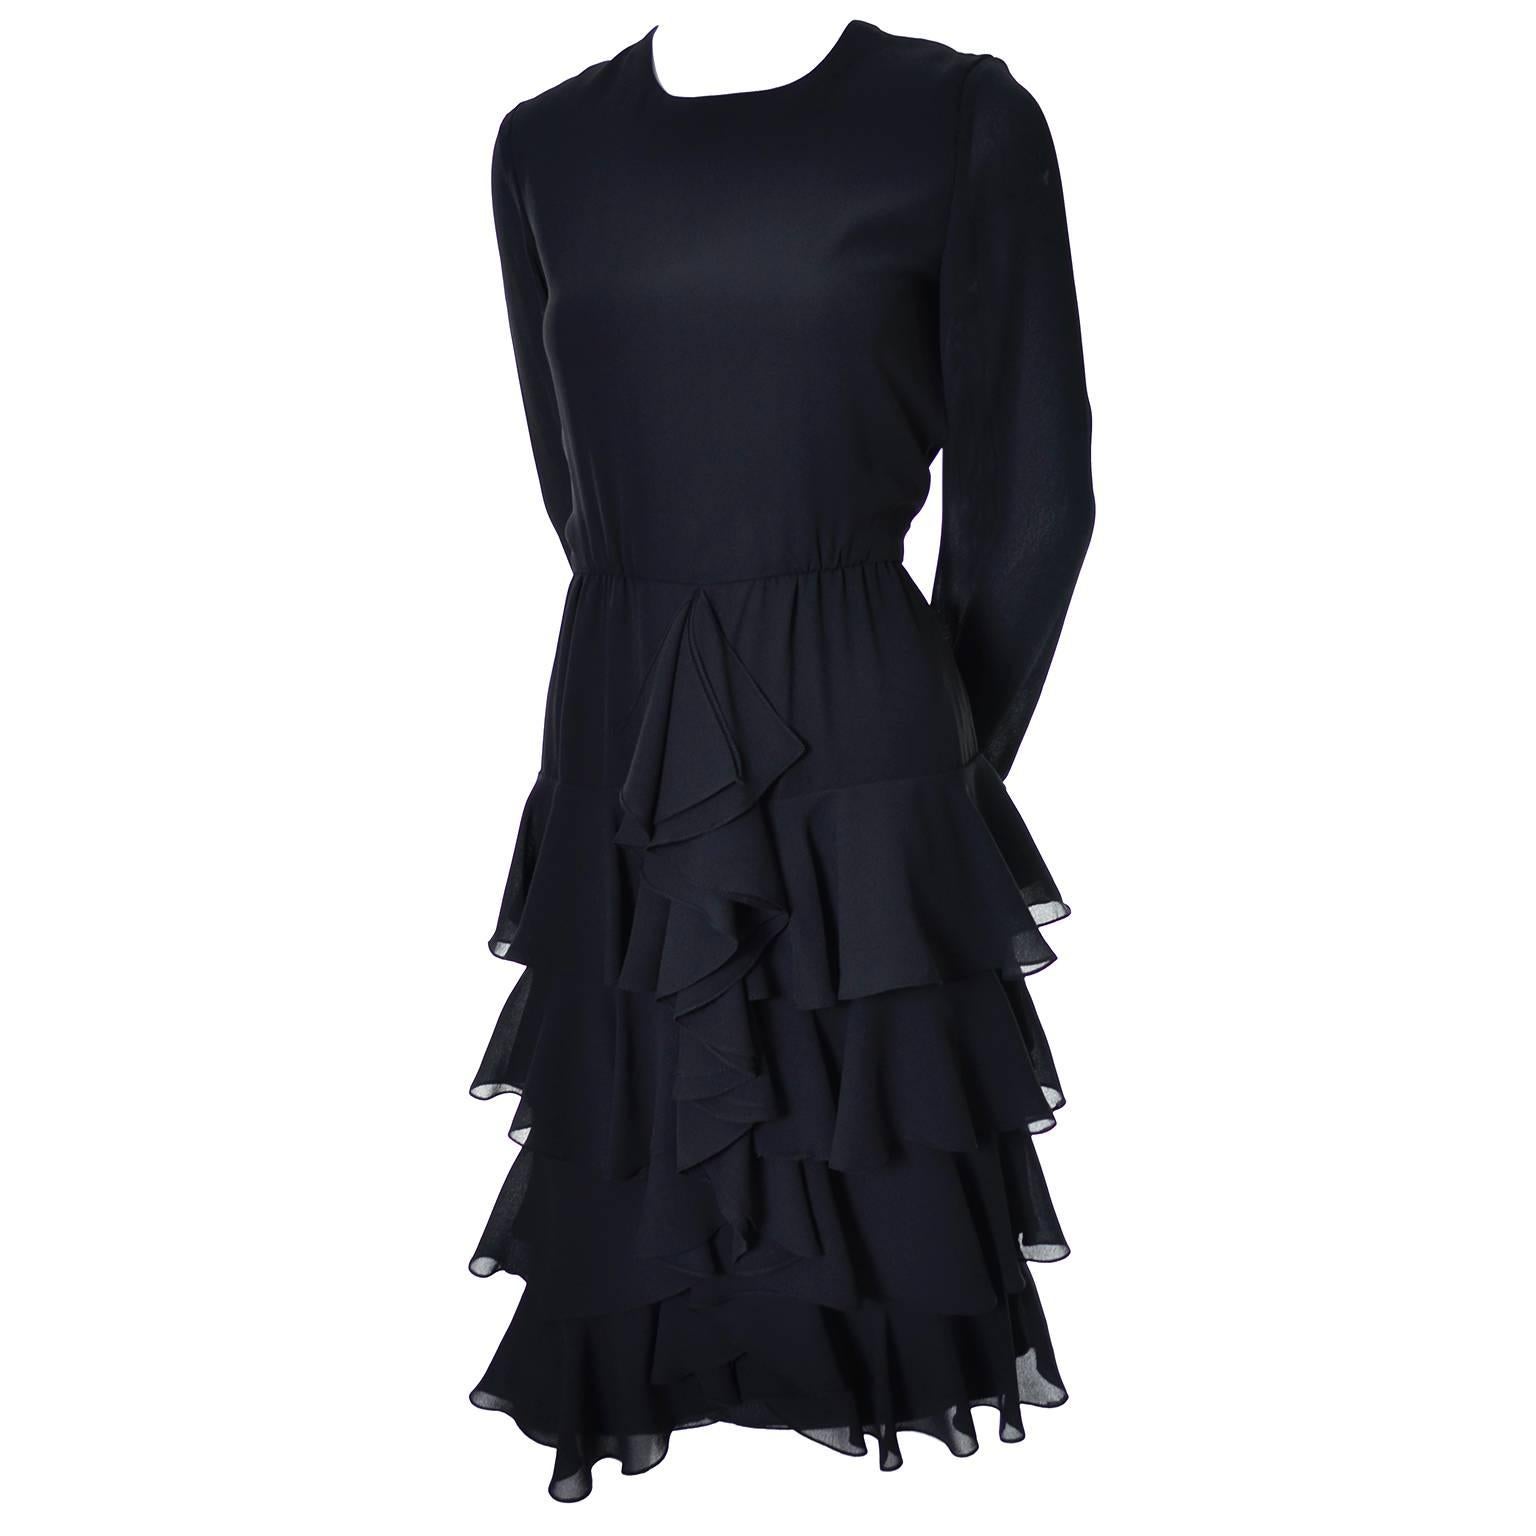 This is a great vintage dress from designer Bill Blass. The dress is layered with ruffled black chiffon crepe and it zips up the back. The long sleeves have ruffled cuffs and though the content label has been removed, the dress has the Bill Blass